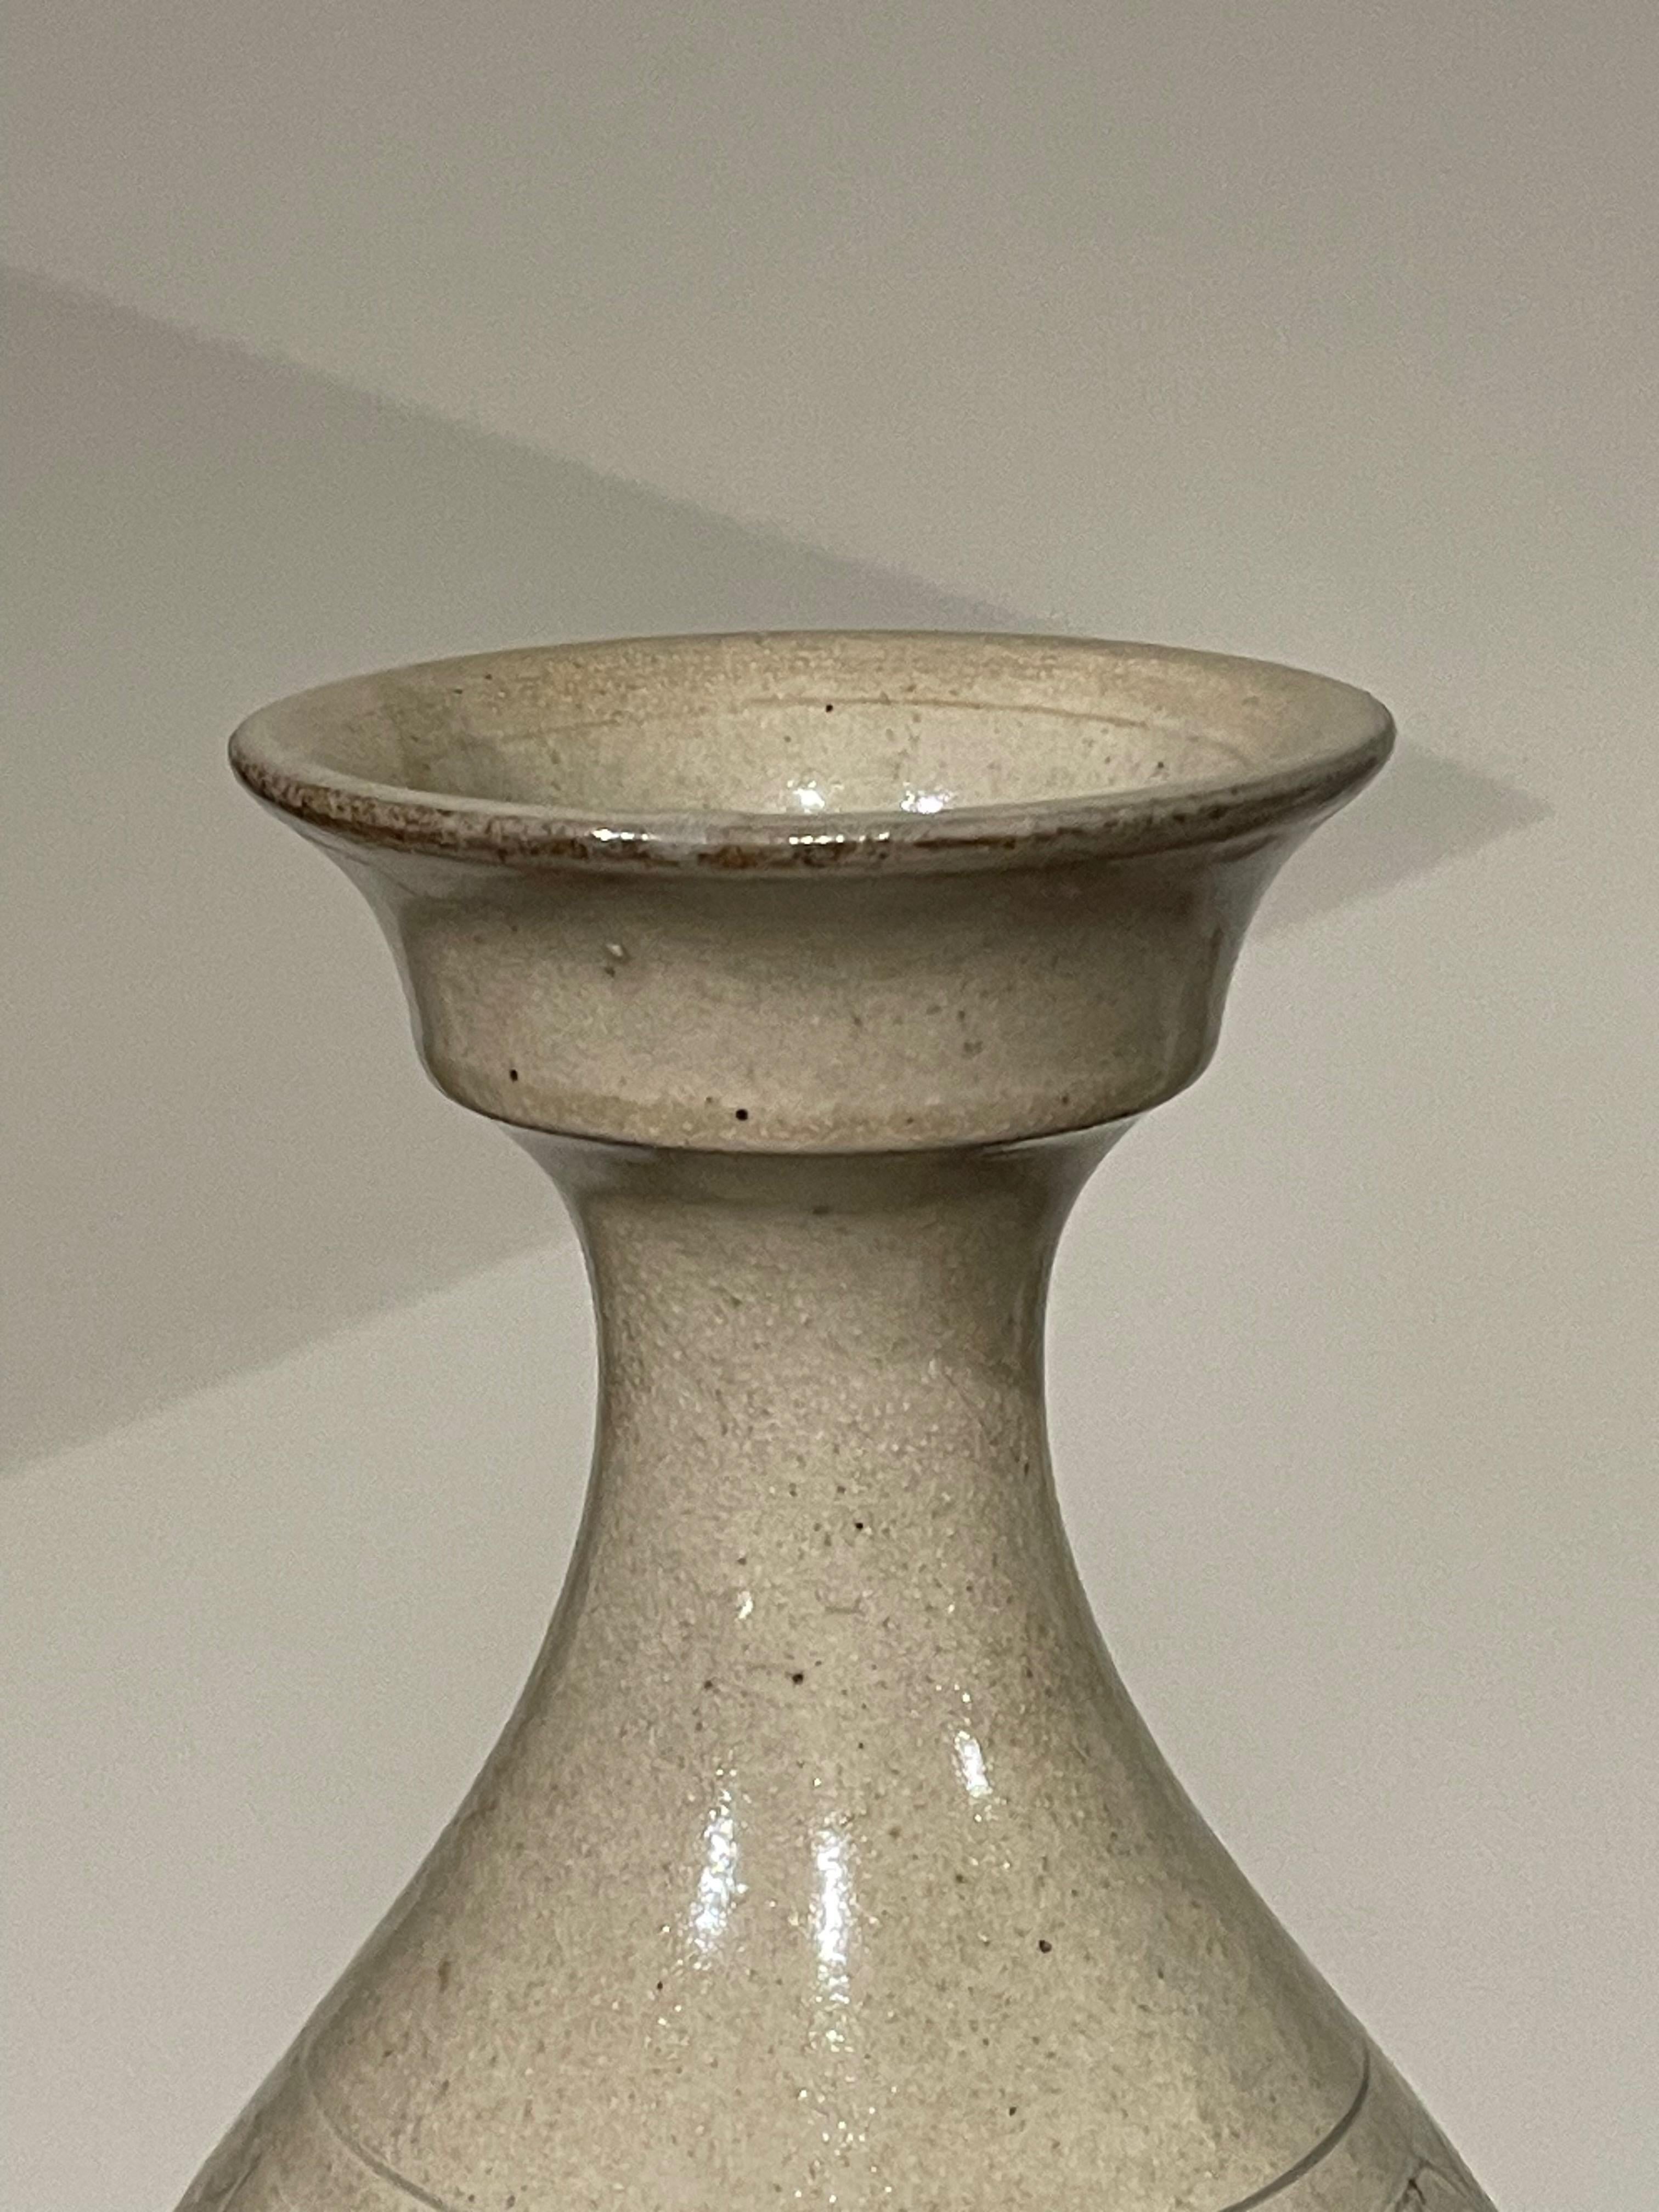 Contemporary Chinese patterned cream vase.
Cup shaped top.
Horizontal bands of circular decorative pattern.
Two available and sold individually.
Collection of six with different shapes available.
ARRIVING APRIL